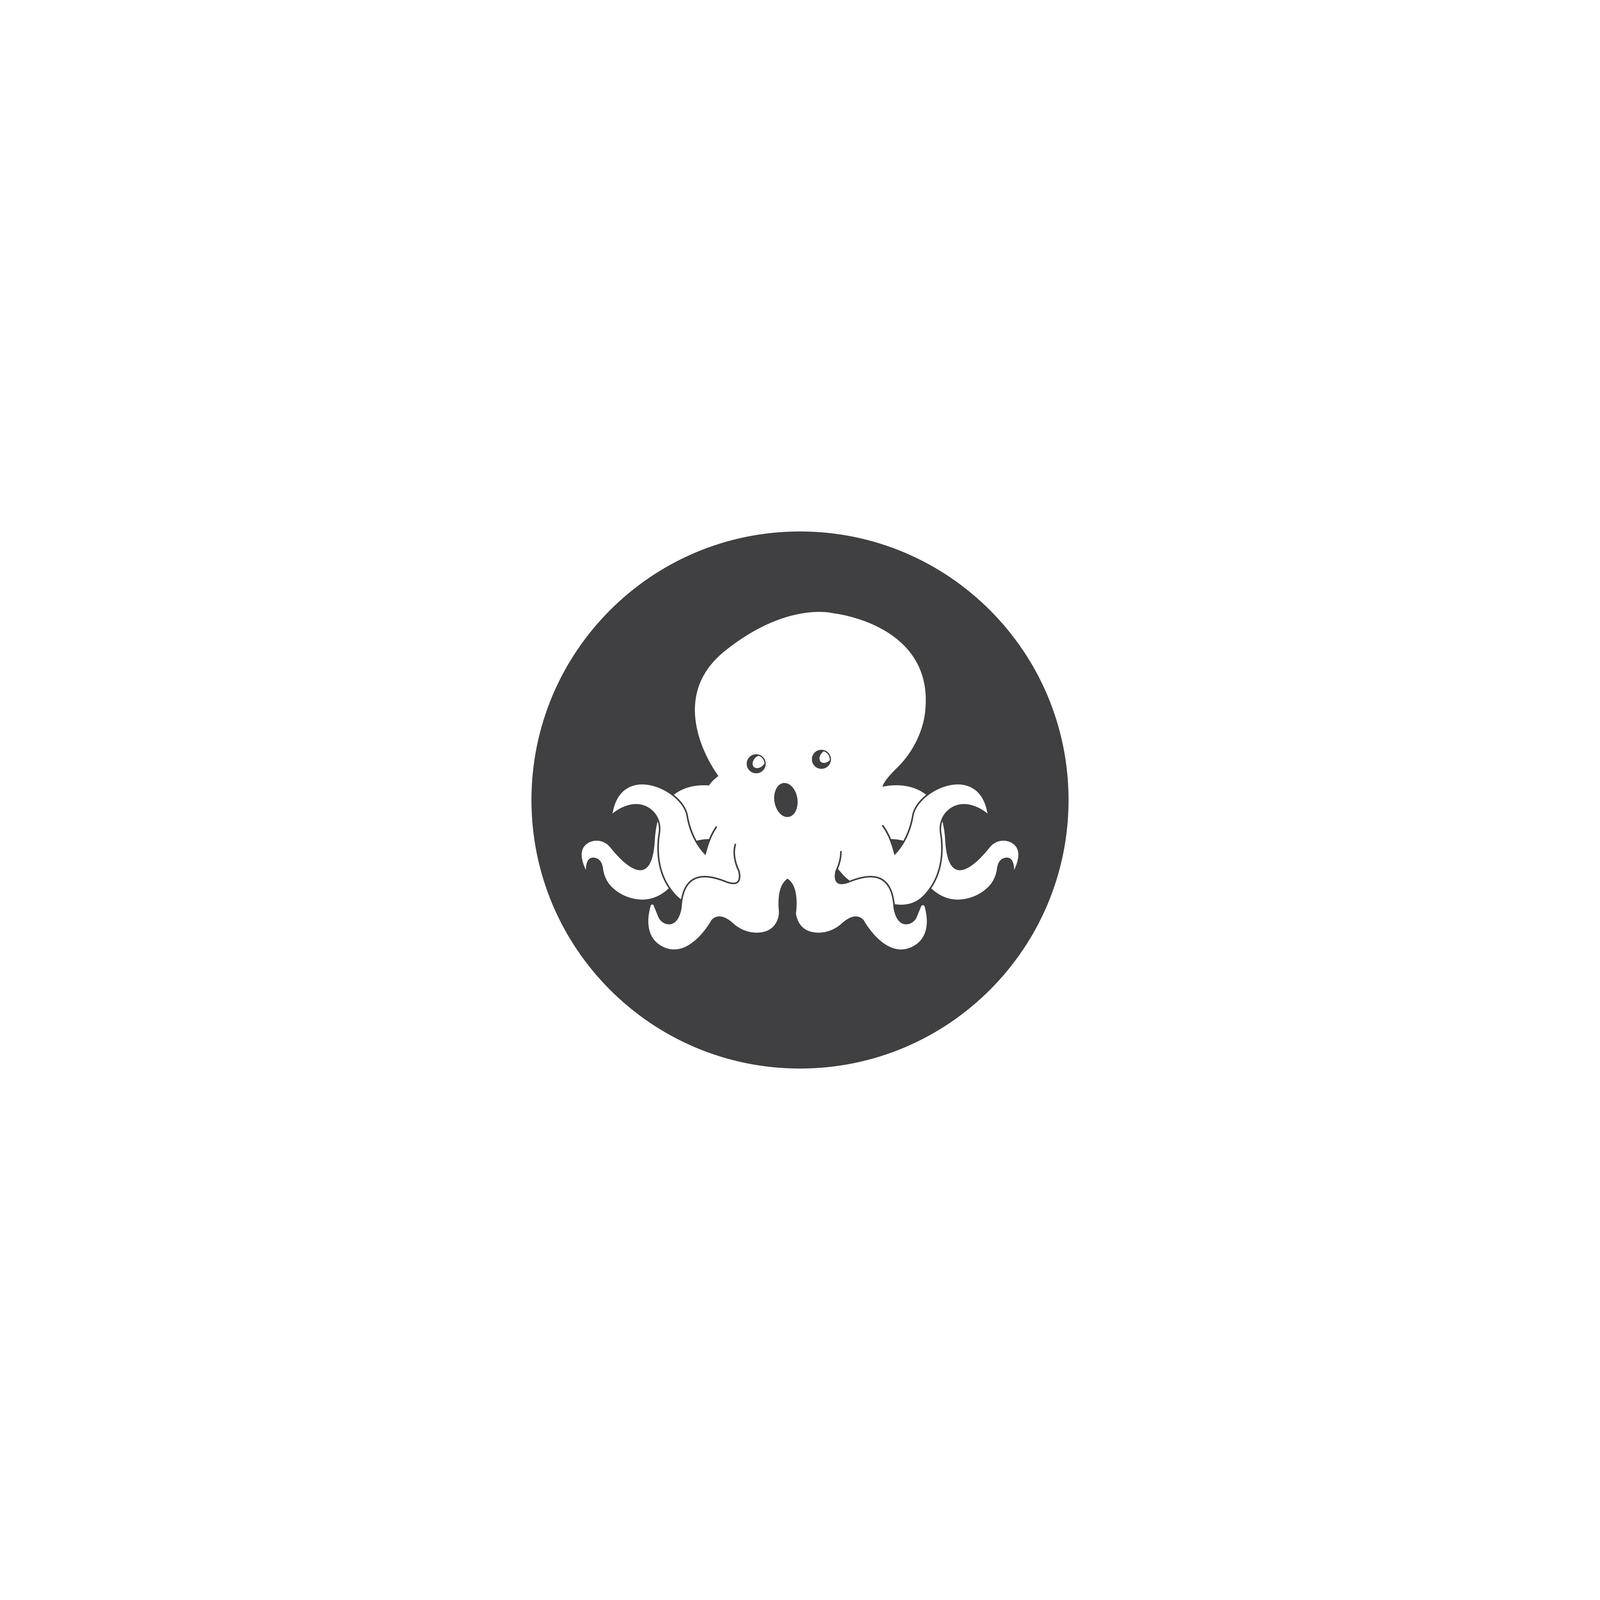 Octopus logo by rnking